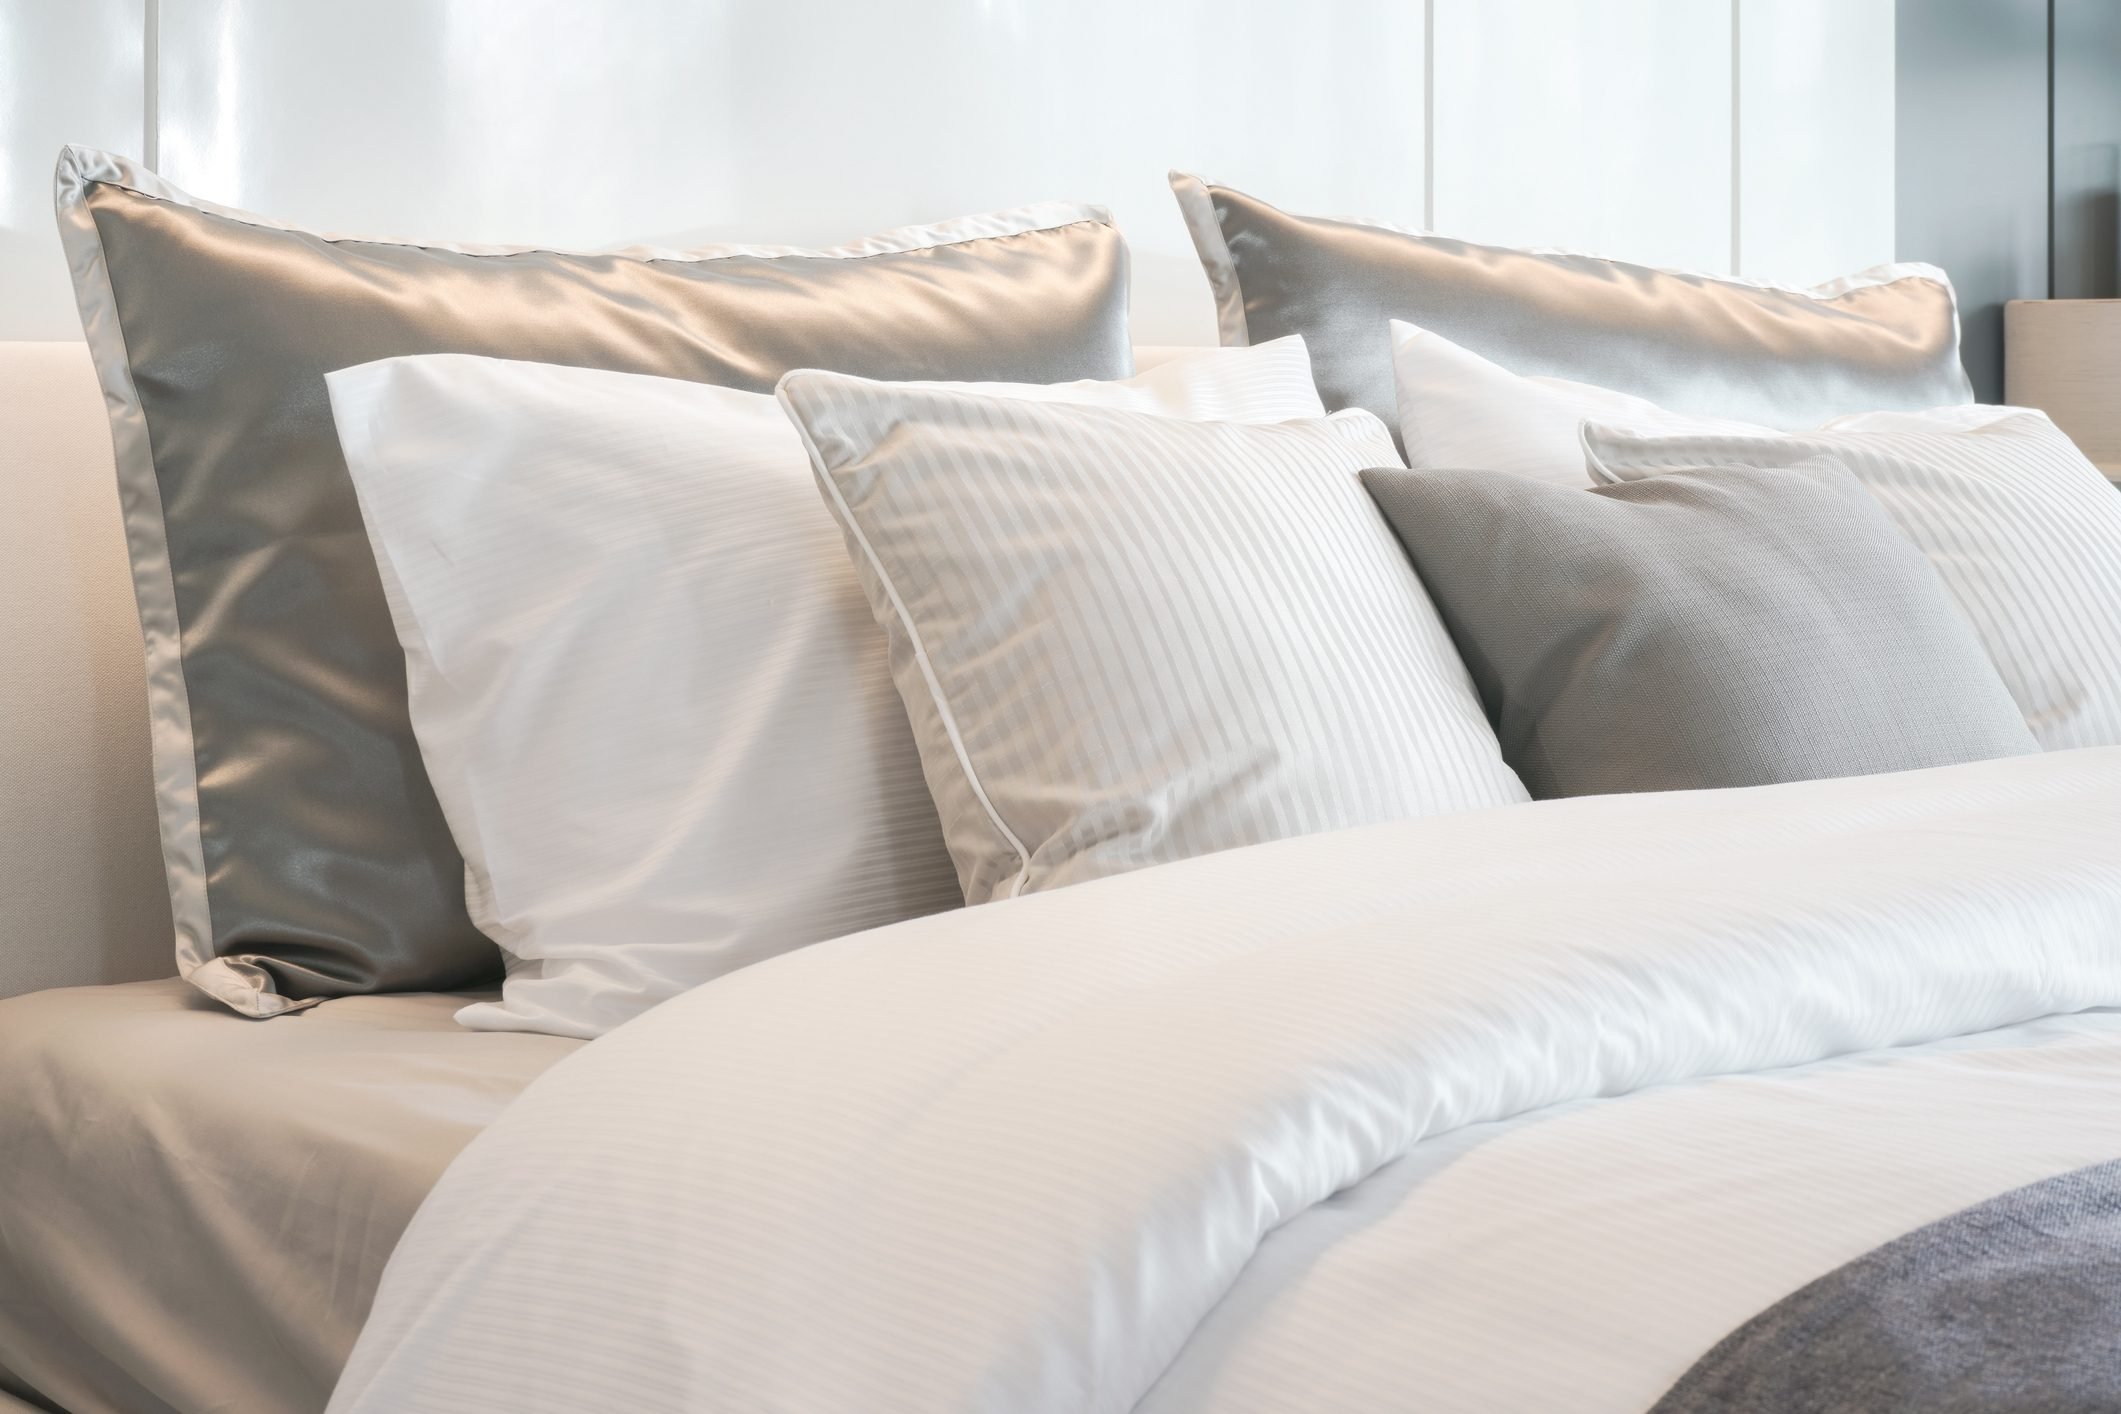 I Slept on a Satin Pillowcase for Better Skin and Hair—Here’s What Happened